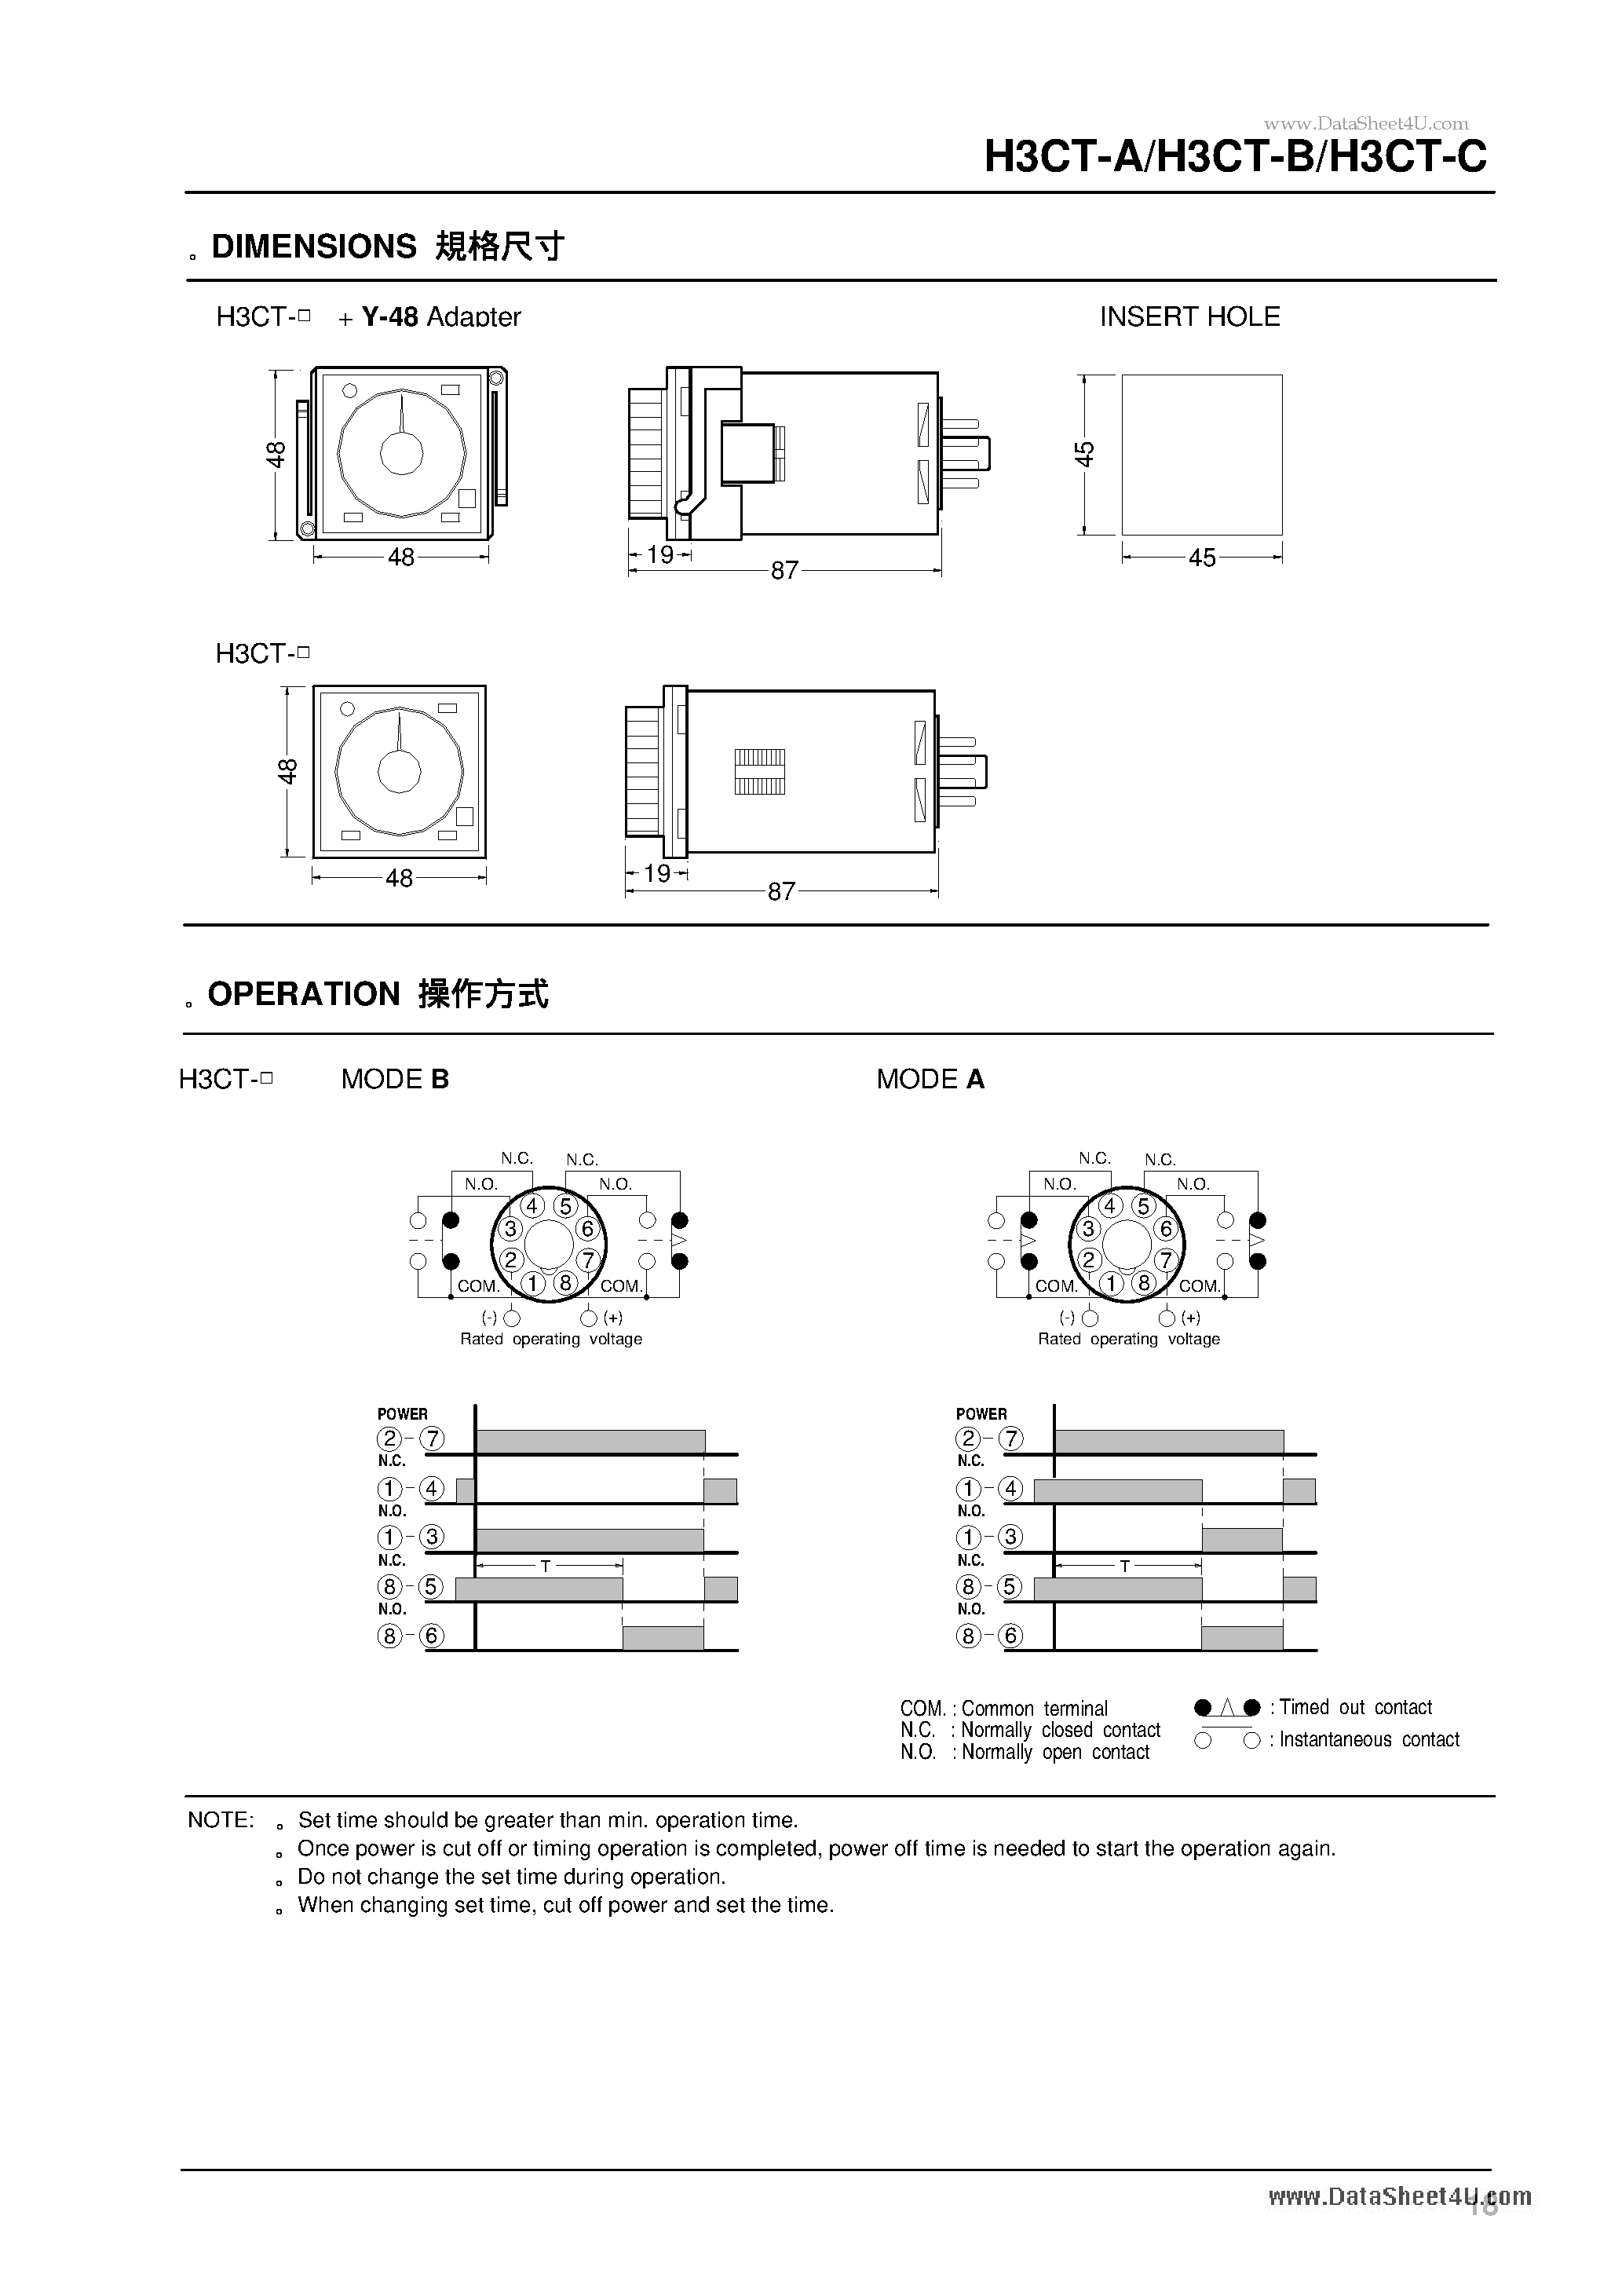 Datasheet H3CT-A - (H3CT-A/-B/-C) Timer page 1